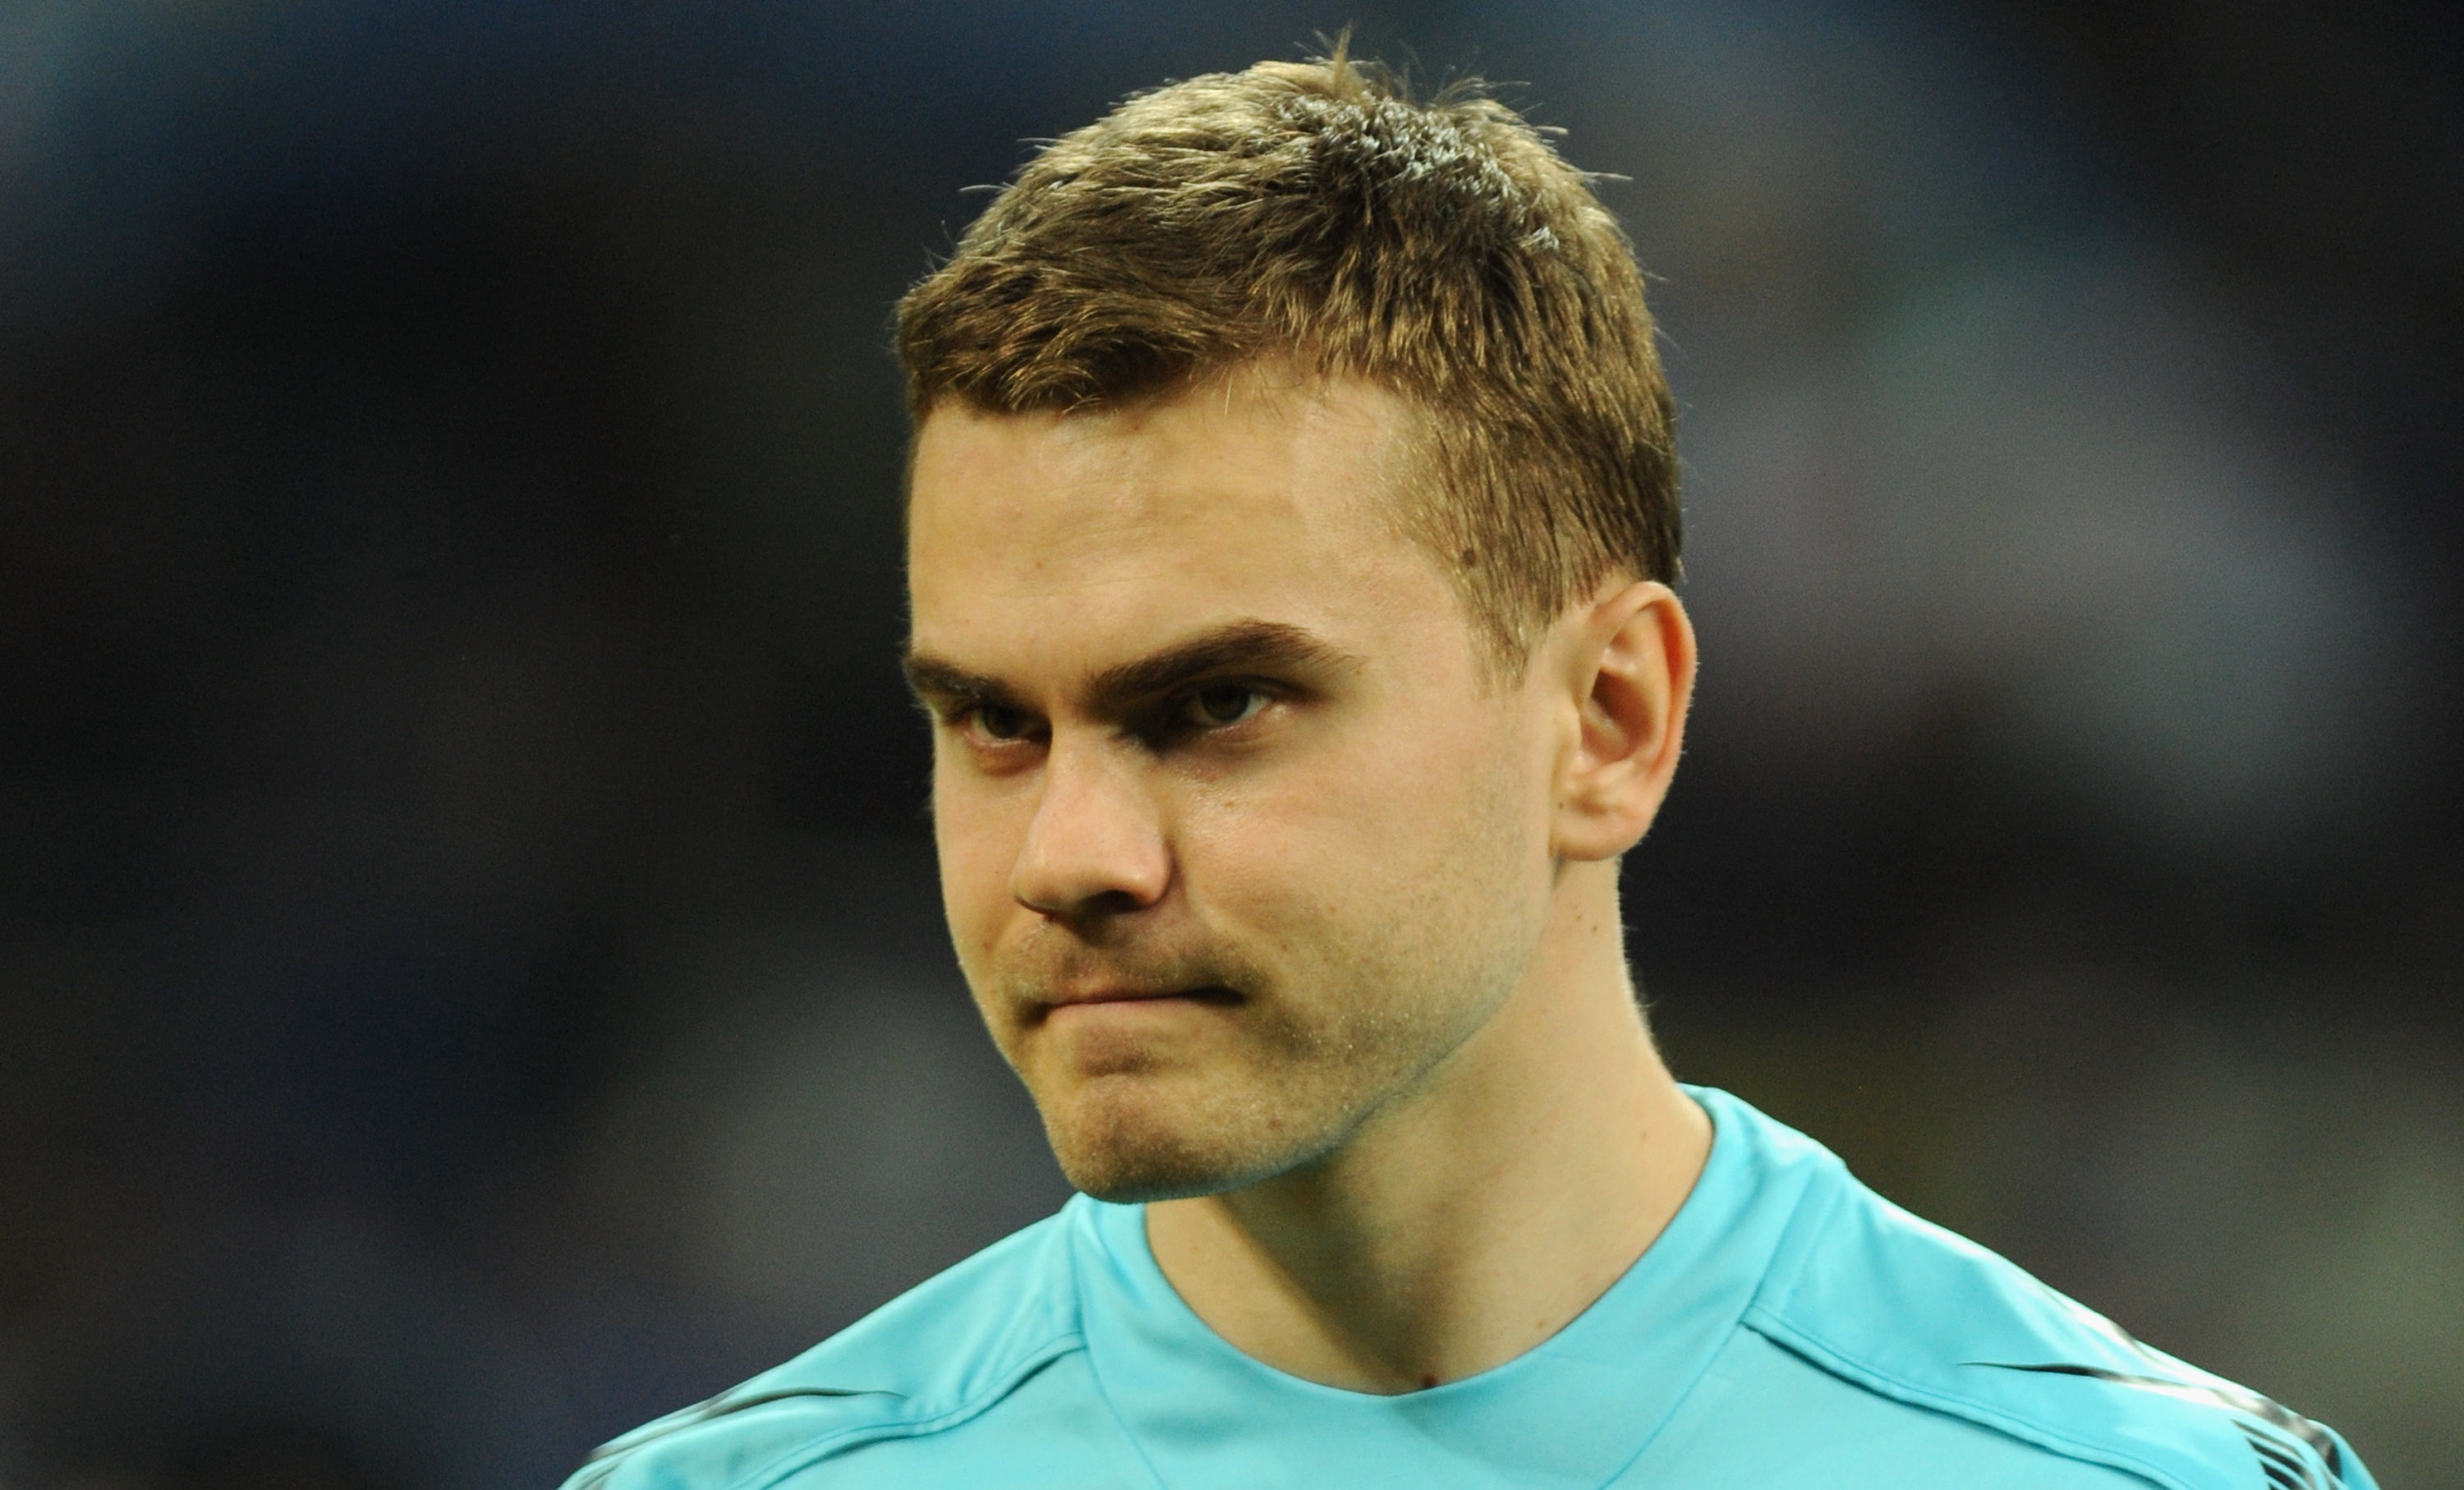 MILAN, ITALY - MARCH 31:  Igor Akinfeev of CSKA Moscow looks on prior to the the UEFA Champions League Quarter Finals, First Leg match between FC Internazionale Milano and CSKA Moscow at Giuseppe Meazza Stadium on March 31, 2010 in Milan, Italy.  (Photo b